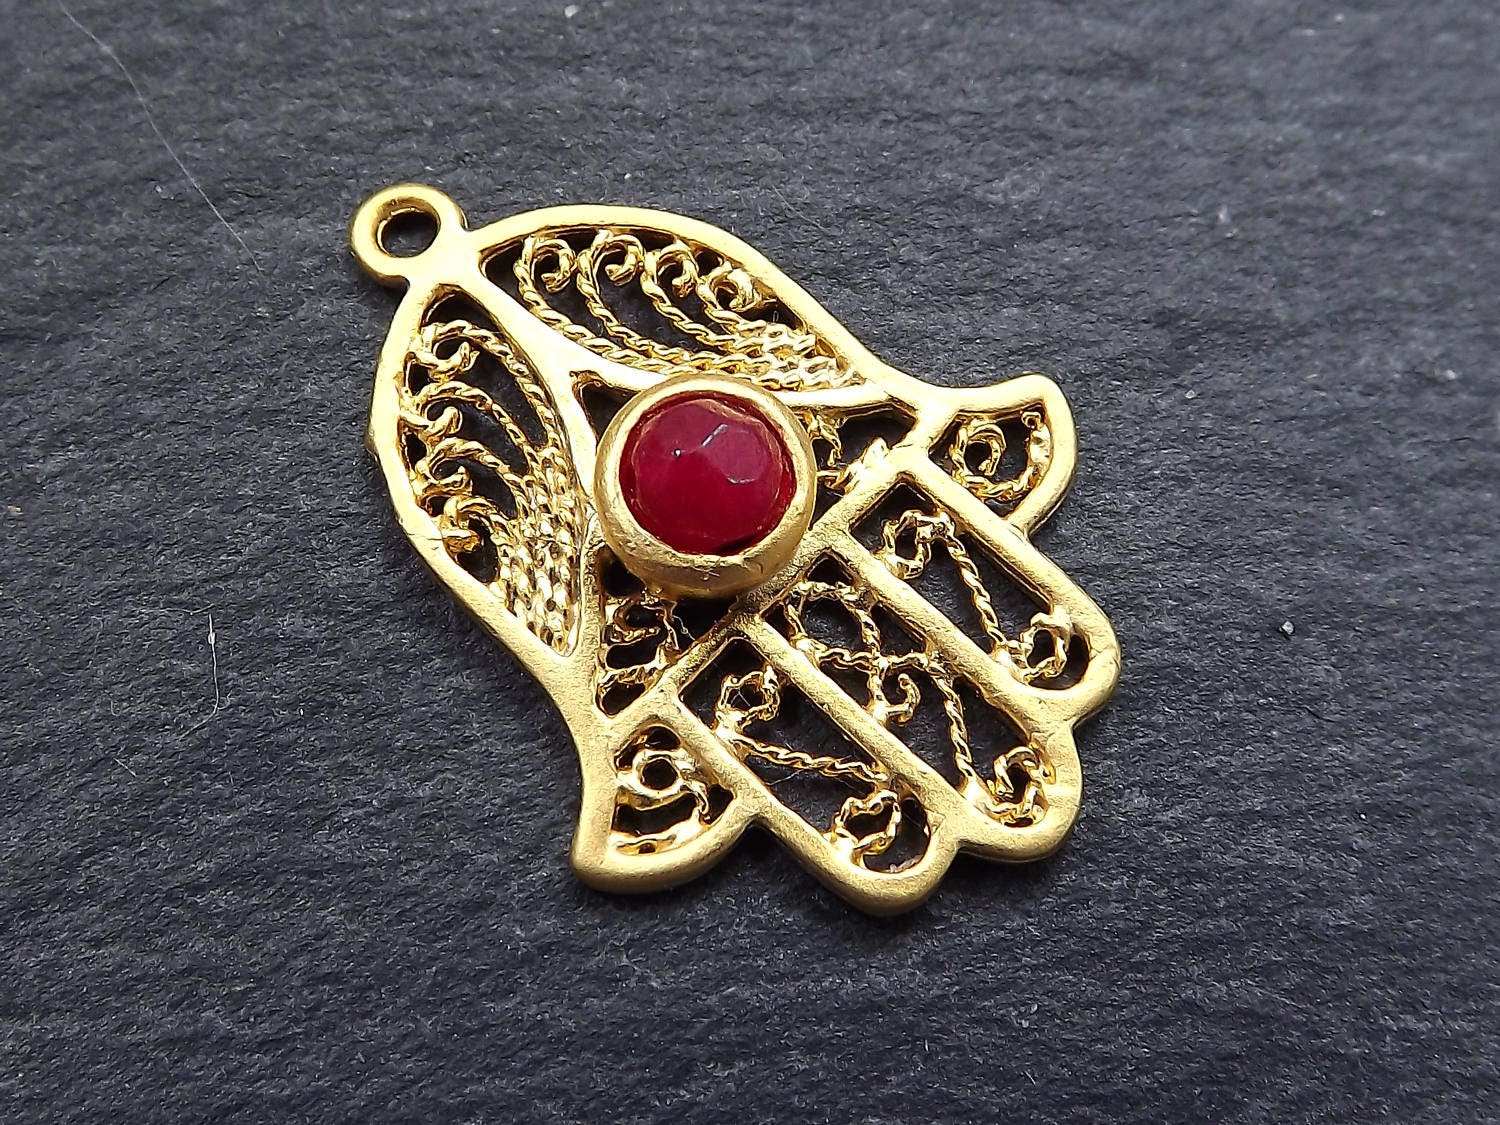 Filigree Hand of Fatima Hamsa Pendant Charm with Red Facet Cut Jade Stone Accent Boho Bohemain Jewelry Supplies - 22k Matte Gold Plated